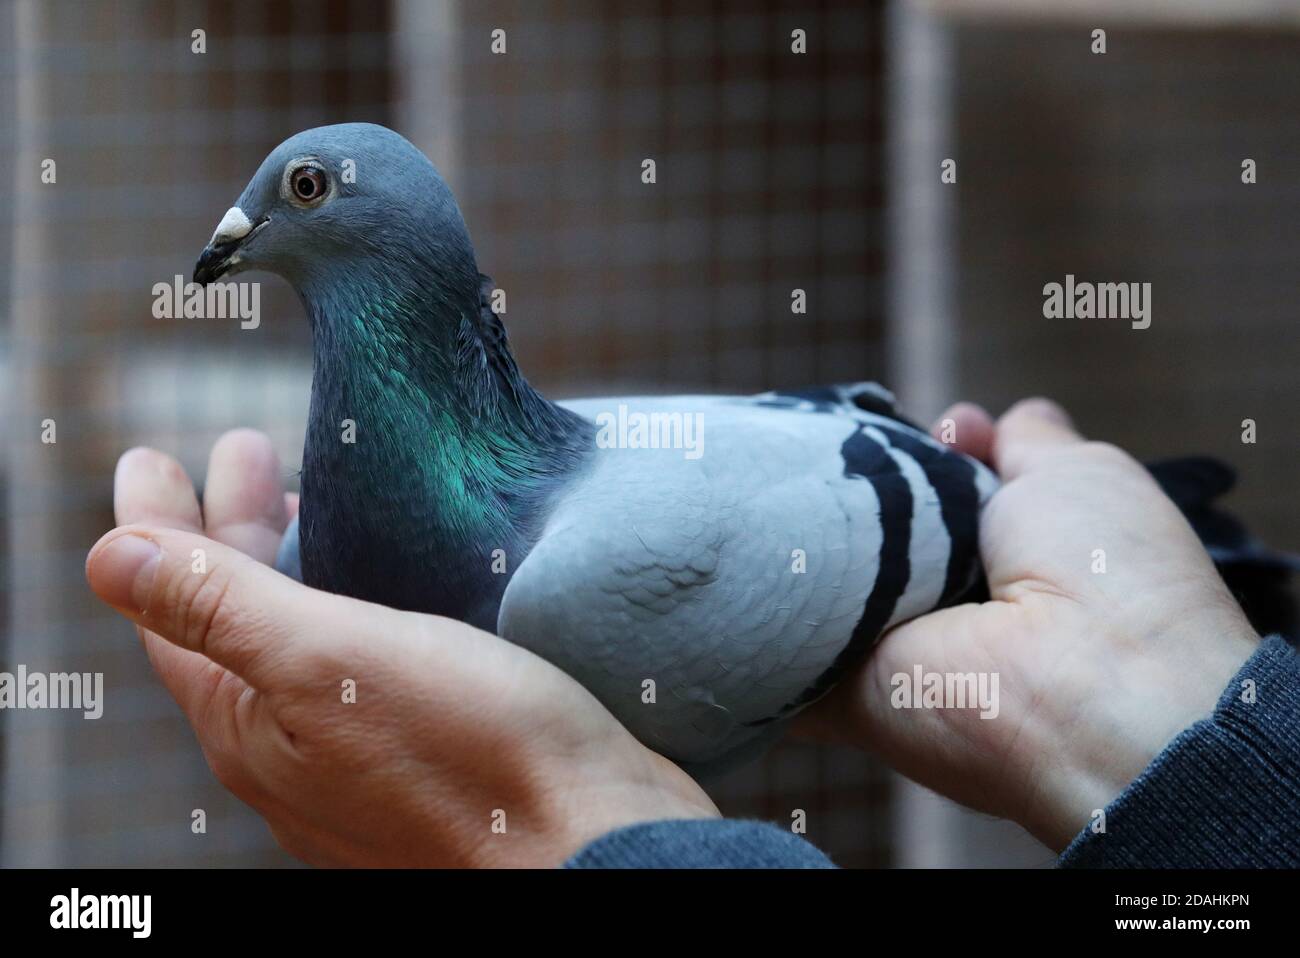 Nikolaas Gyselbrecht, founder of Pipa, a Belgian auction house for racing  pigeons, shows a two-year old female pigeon named New Kim, that will set a  new world record price when an auction